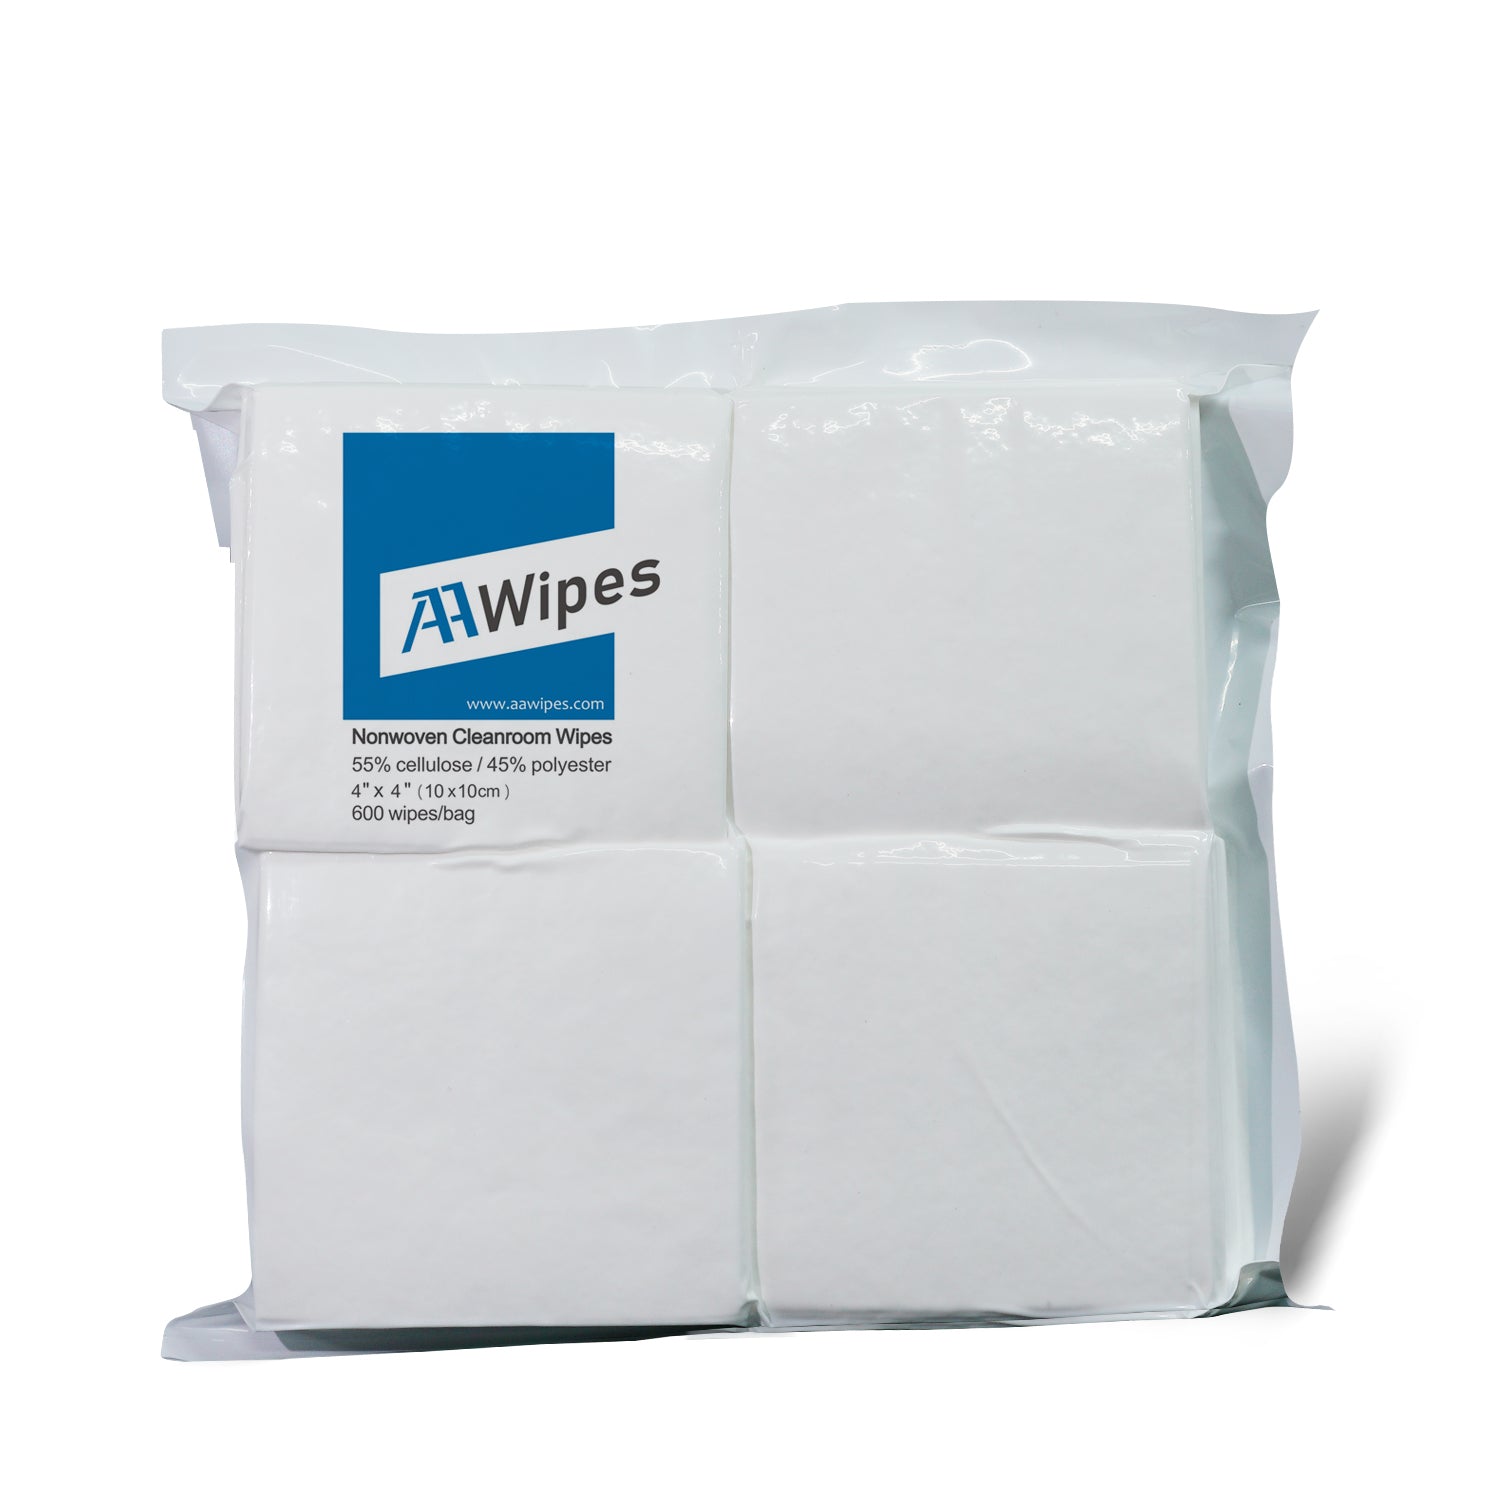 Lint-free cleanroom wiper ESD cloth Anti-Static ESD Wipes 12x12 (Starting  from 1,000 Wipes/10 Bags/1 Box) for lab electronic cleaning (No. CE16012)